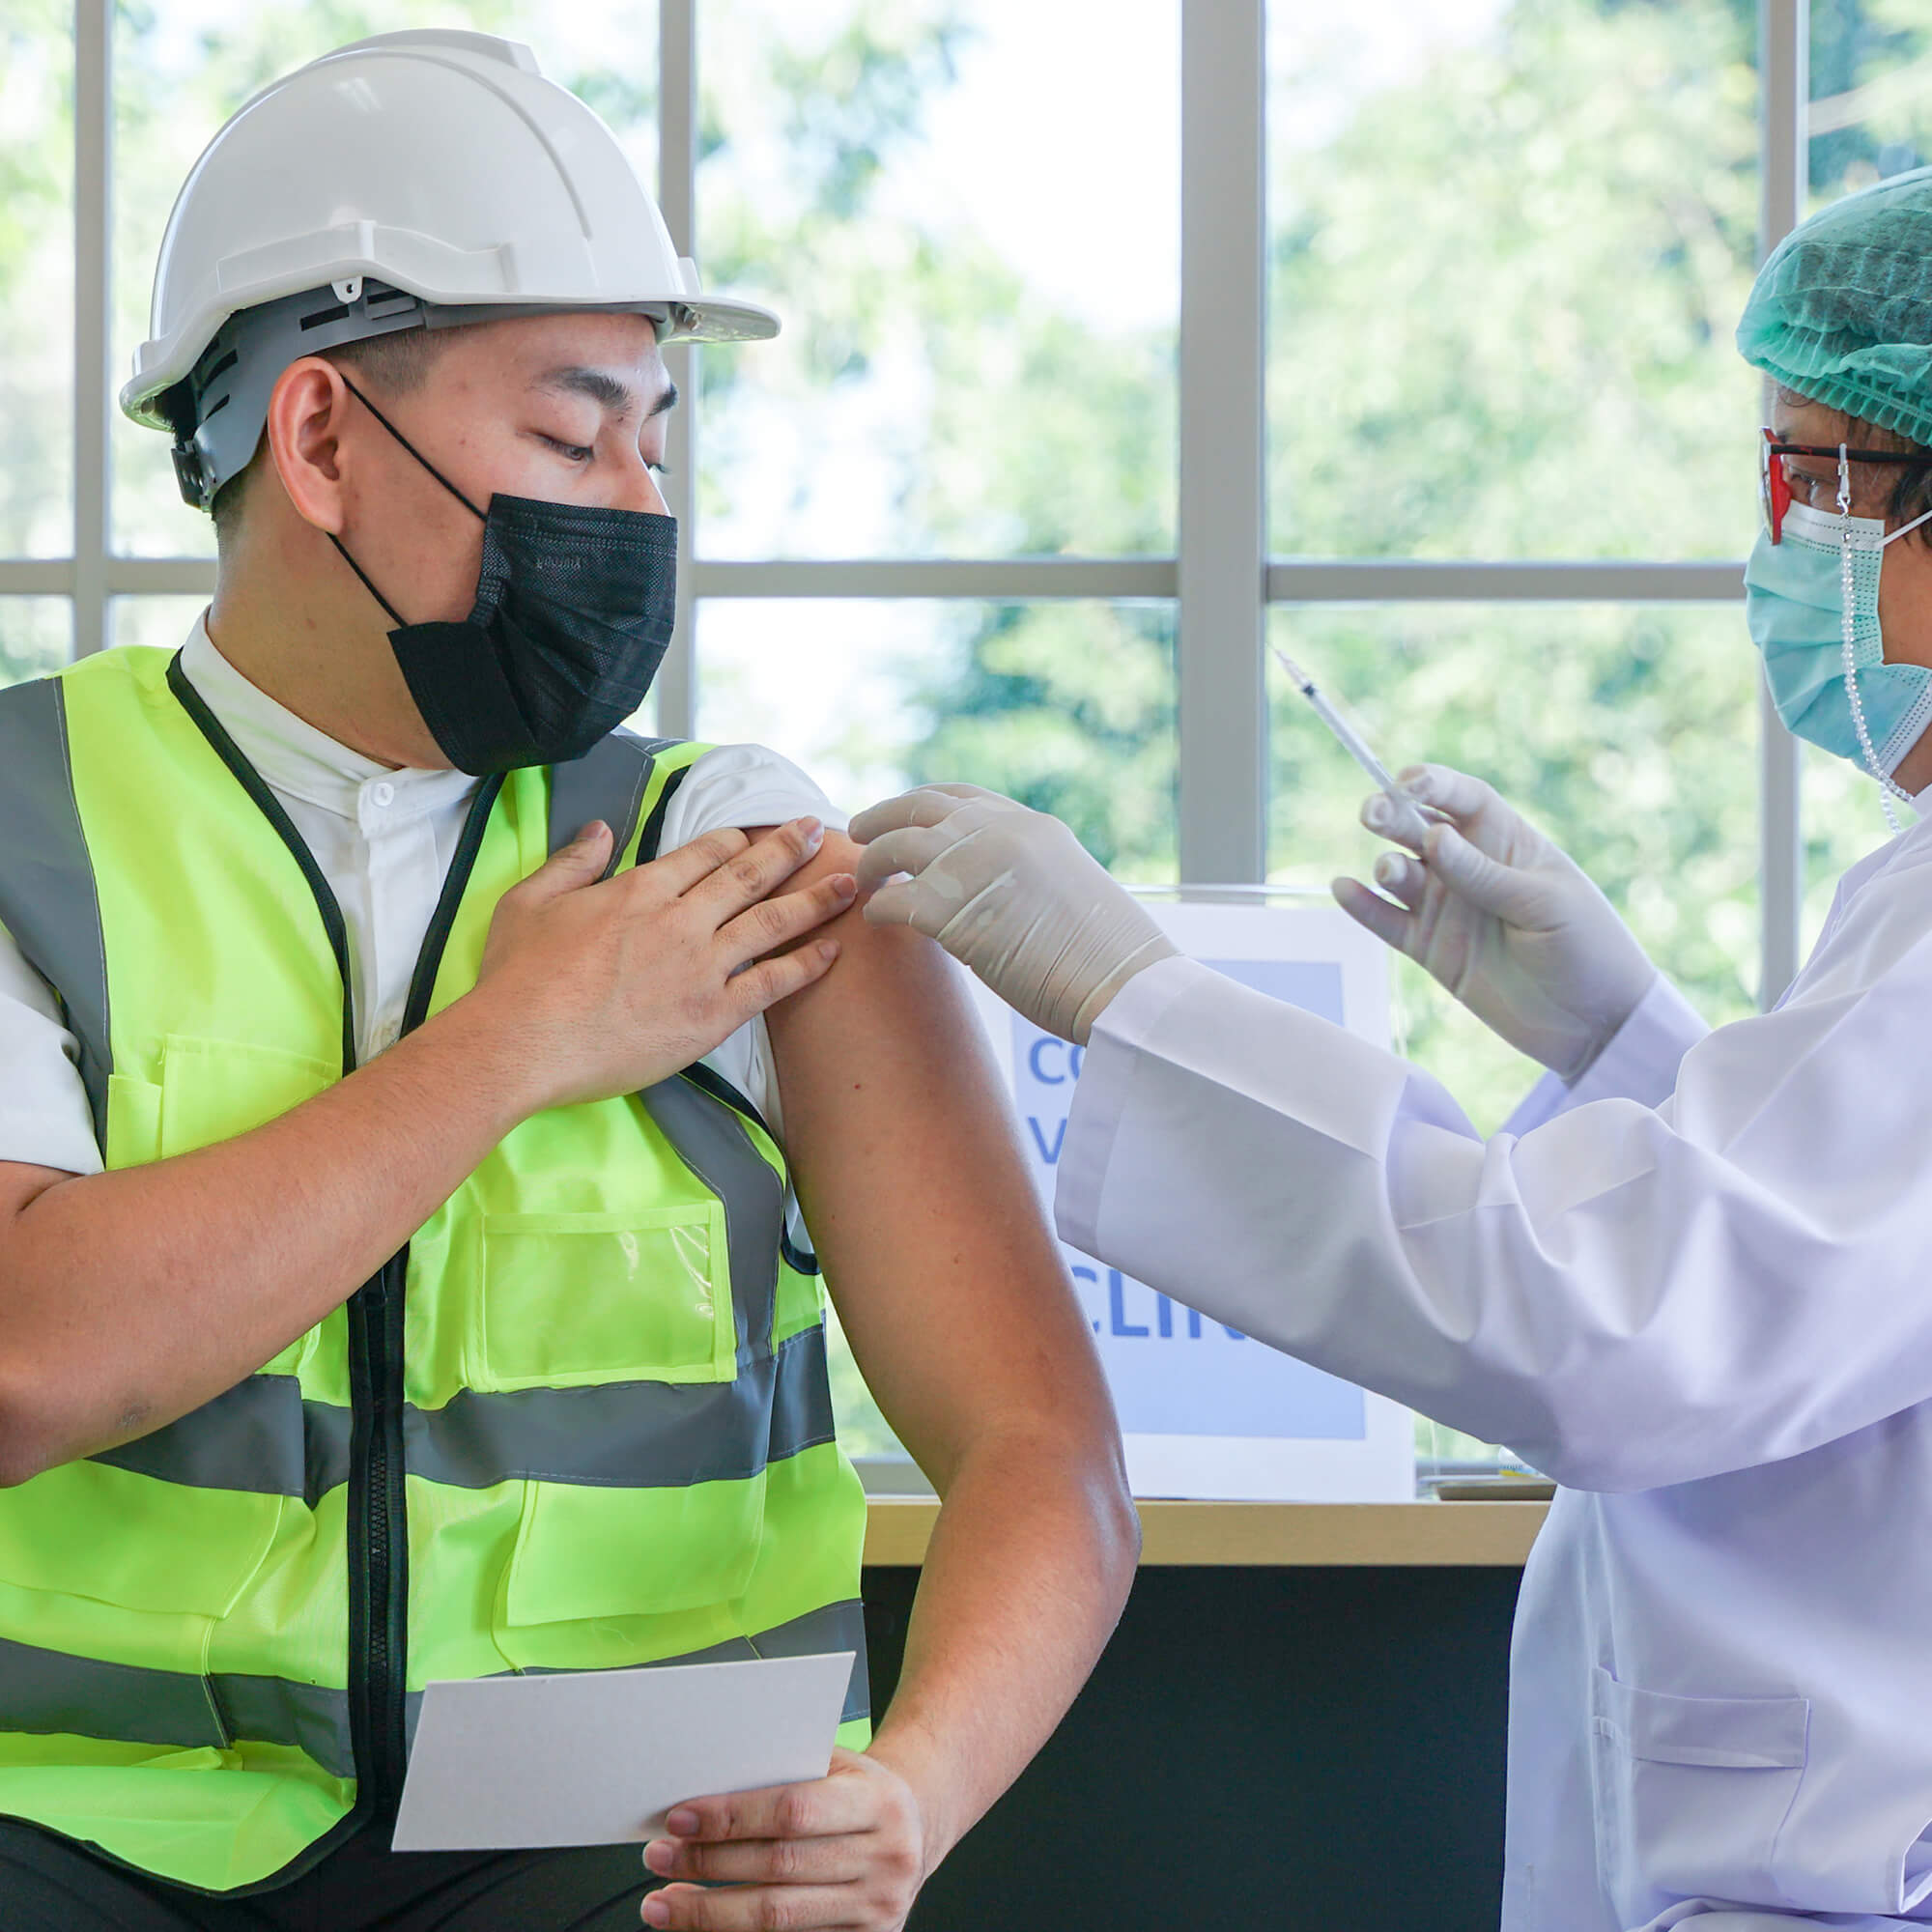 Worker getting vaccinated